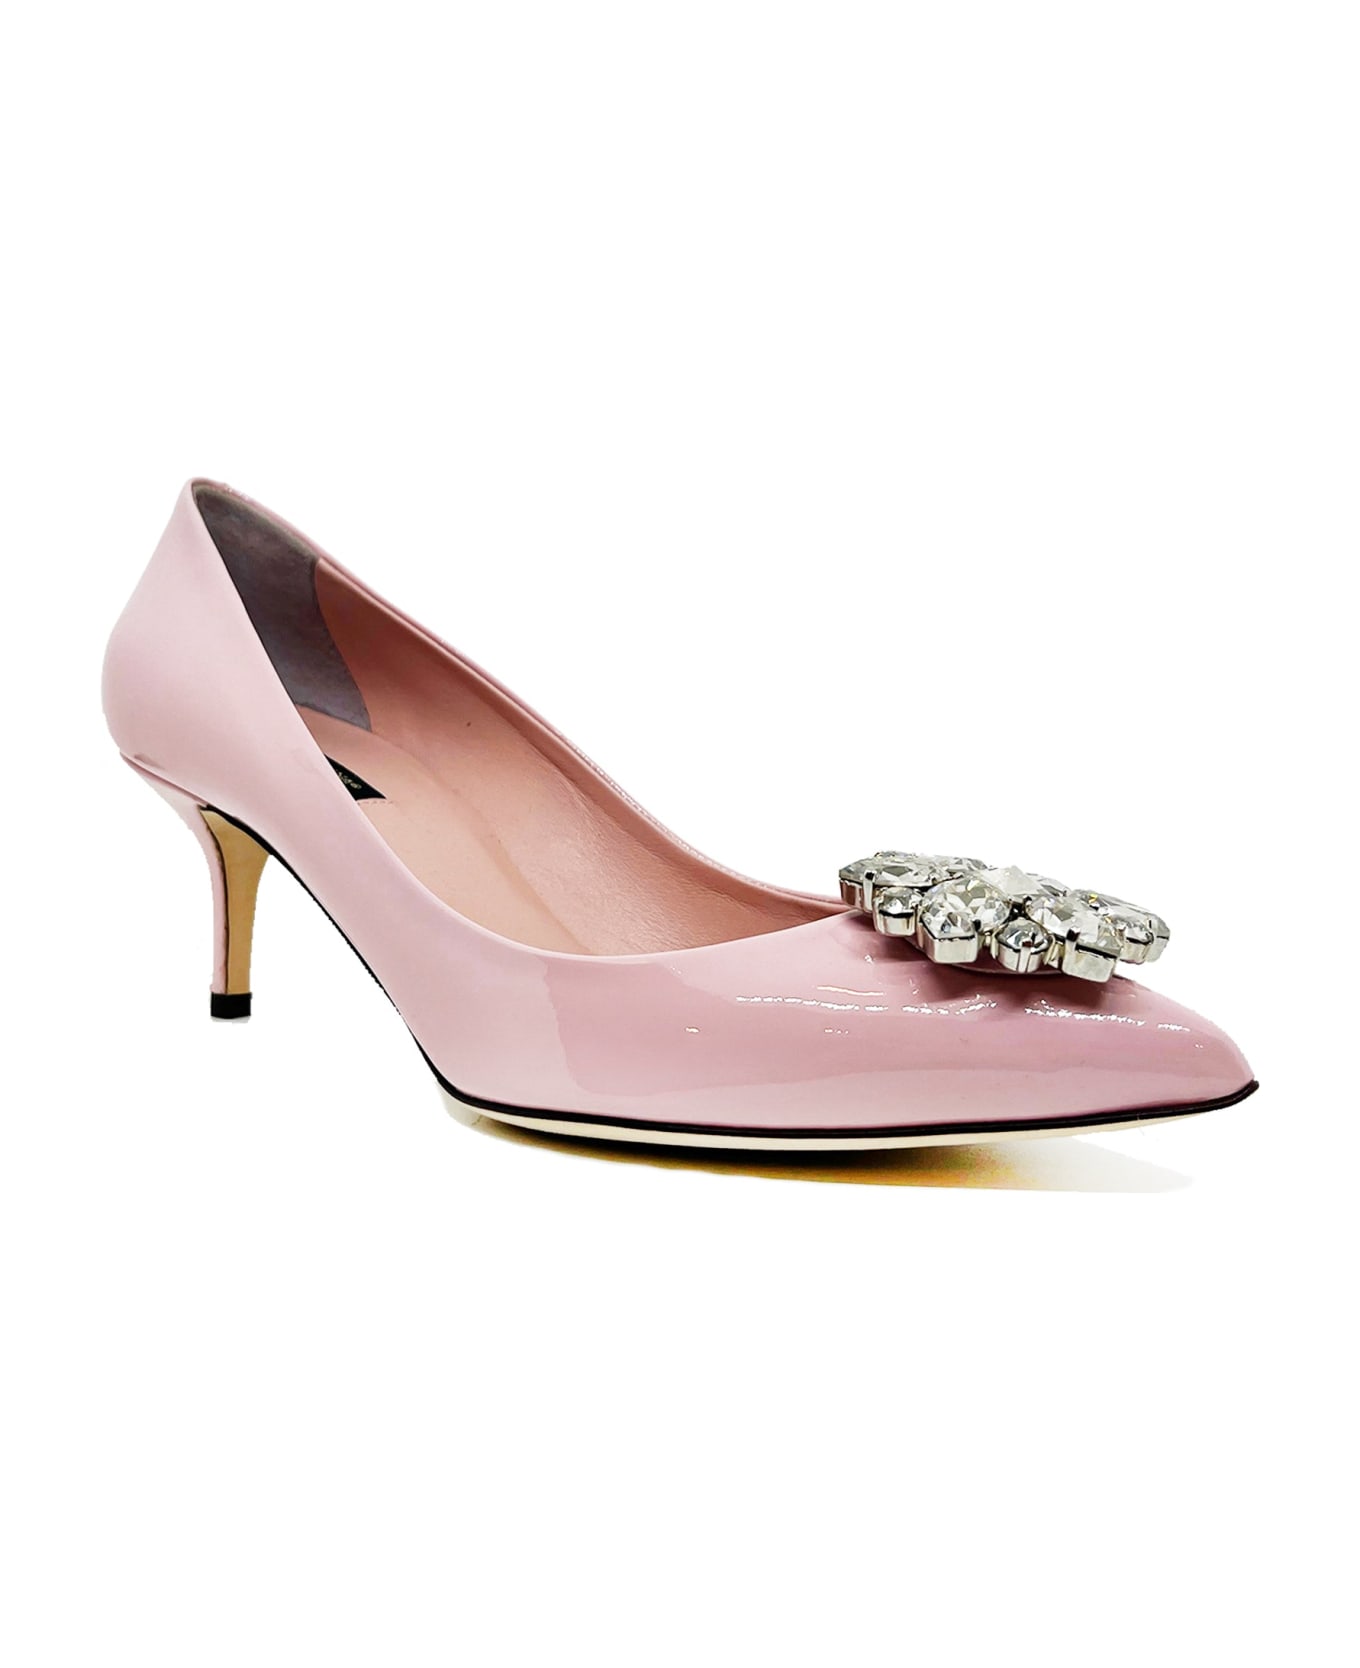 Dolce & Gabbana Bellucci Leather Pumps - Pink ハイヒール